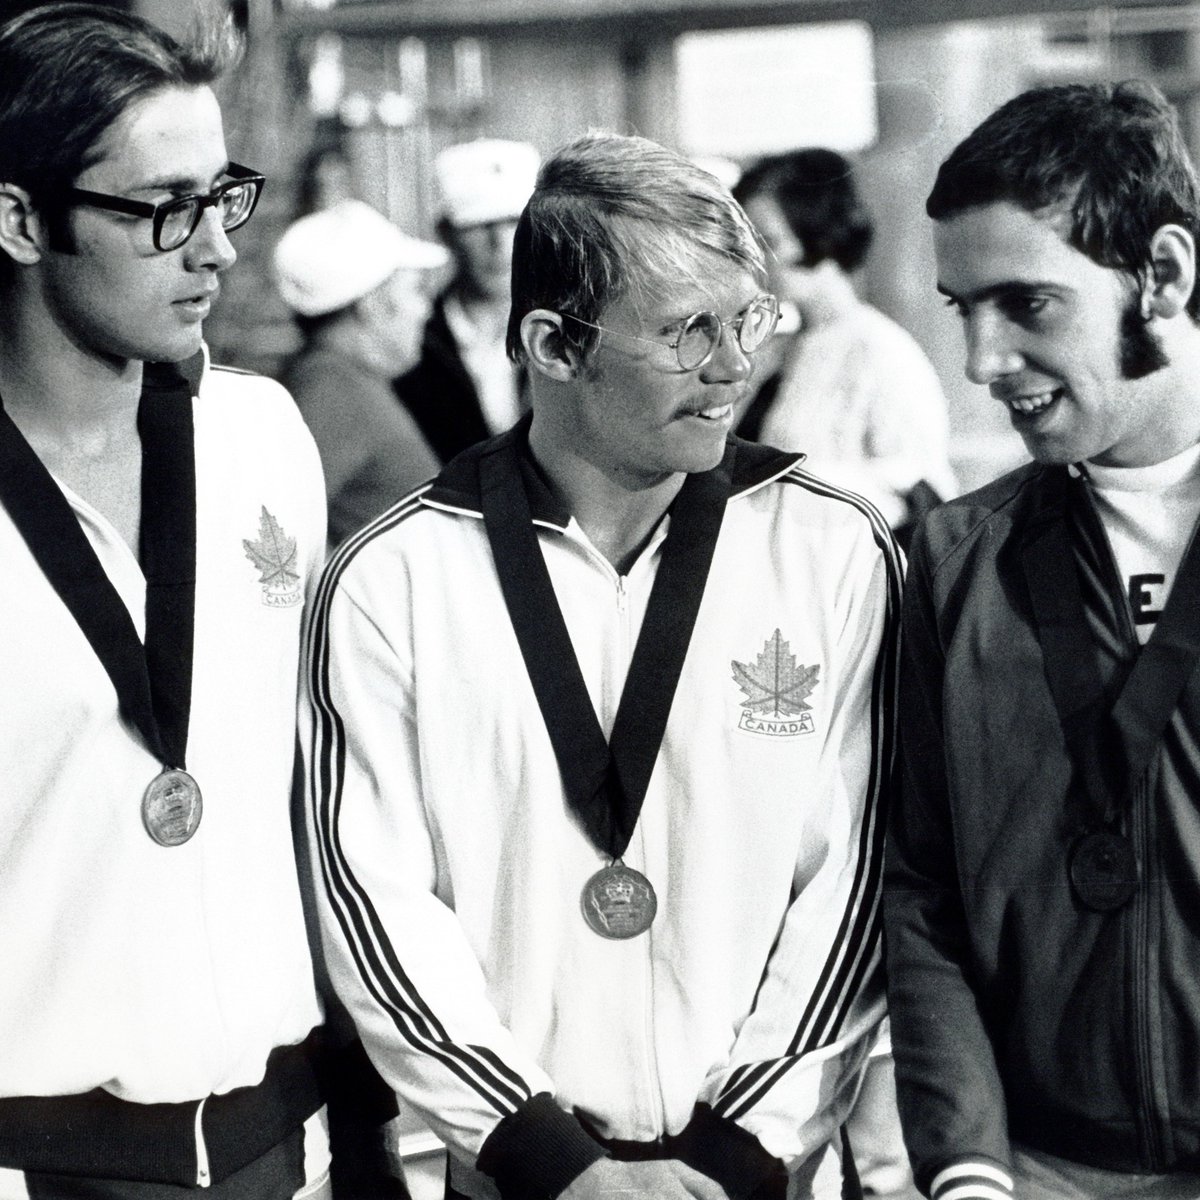 These black and white snapshots were captured during the 1970 Commonwealth Games in Edinburgh. This was the Games where Canada made the FIRST-ever medal sweep at the Commonwealth Games in the Men's 100m Freestyle. 🥇🥈🥉